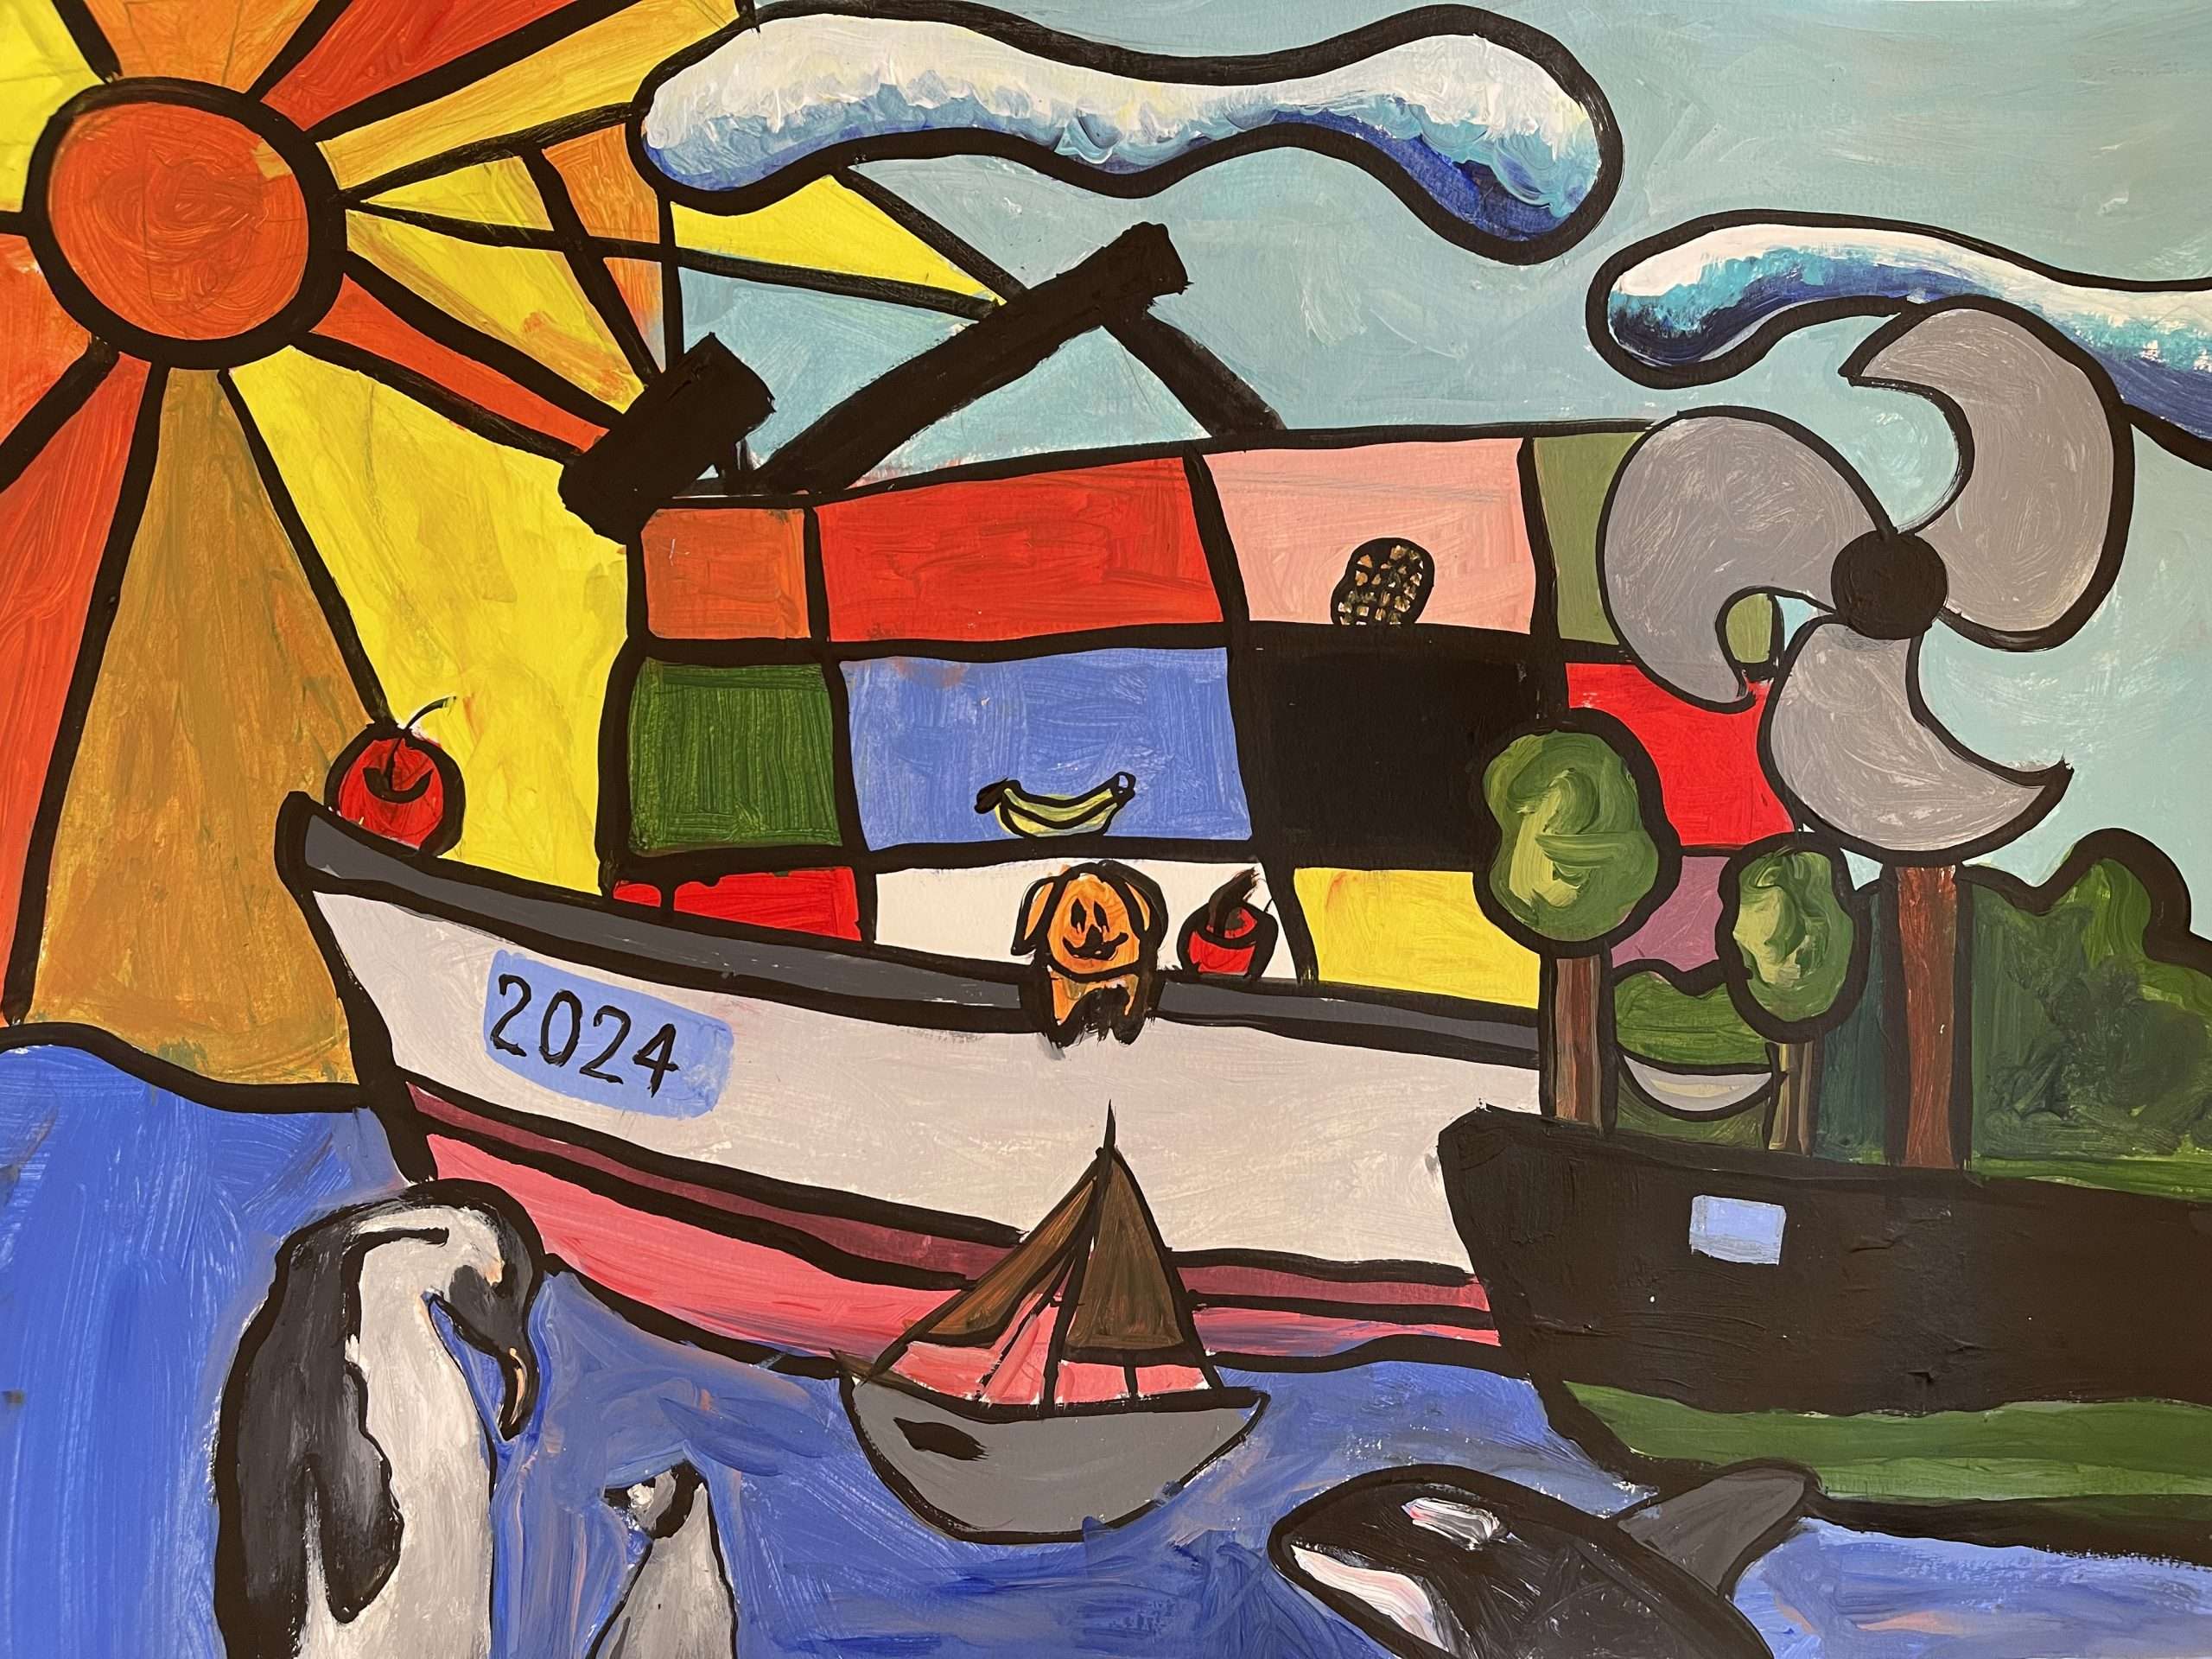 Drawing of a ship docked on the shore and a sailboat. There are penguins and an orca in the water. The text "2024" is on the side of the ship as a dog and fruit are also on the ship.